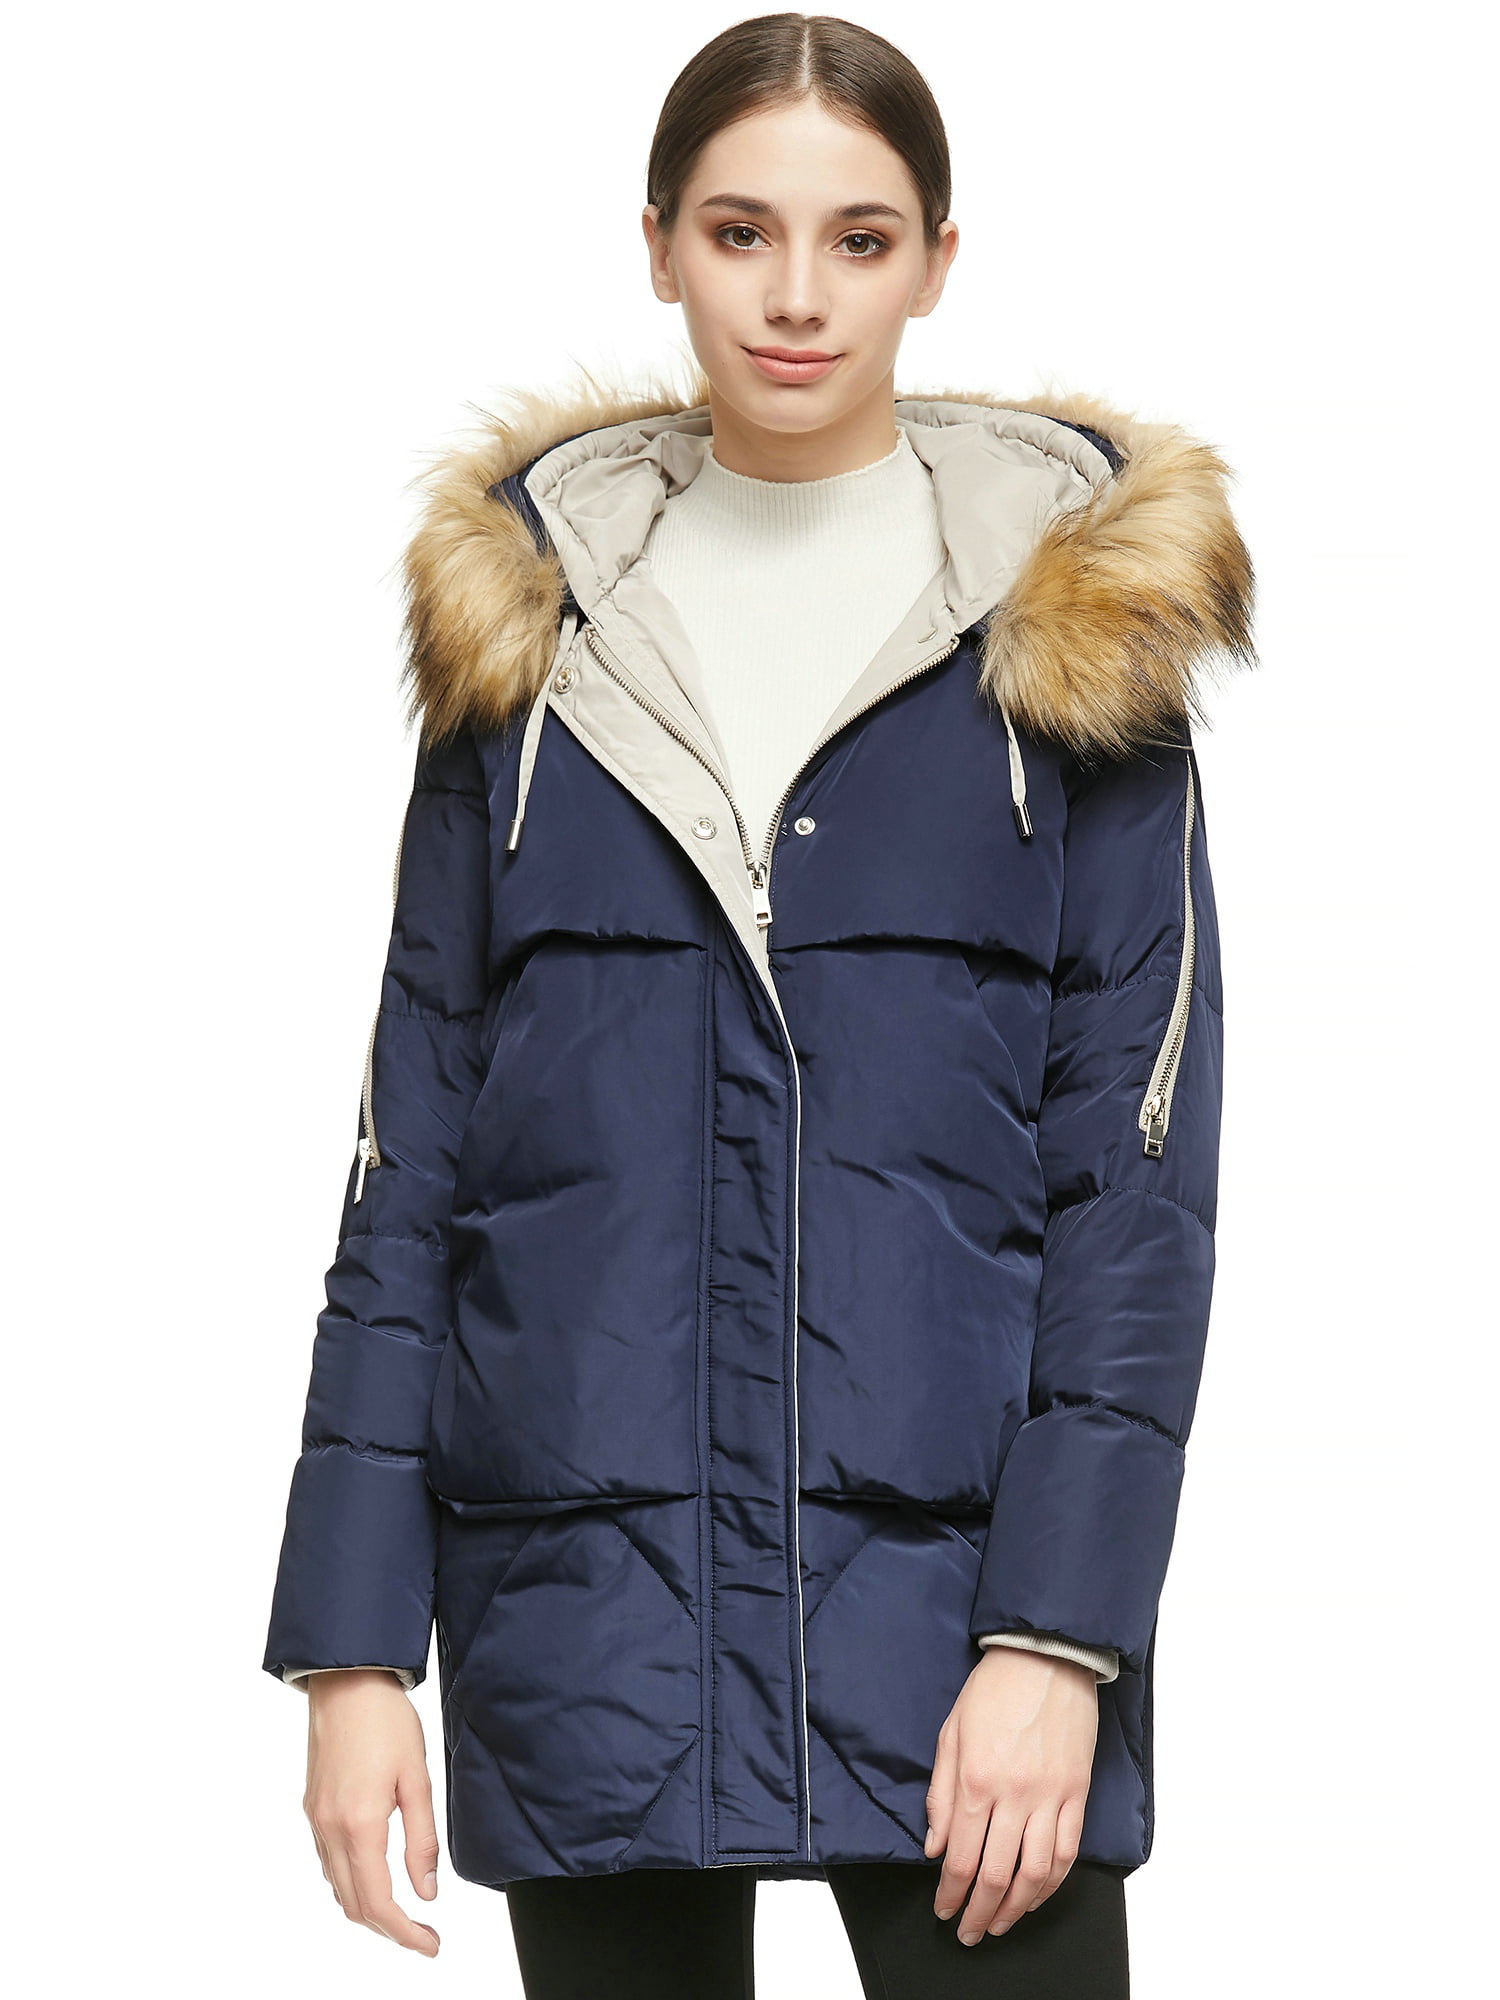 Women's Removable Faux Fur Collar Zip Up Puffer Jacket